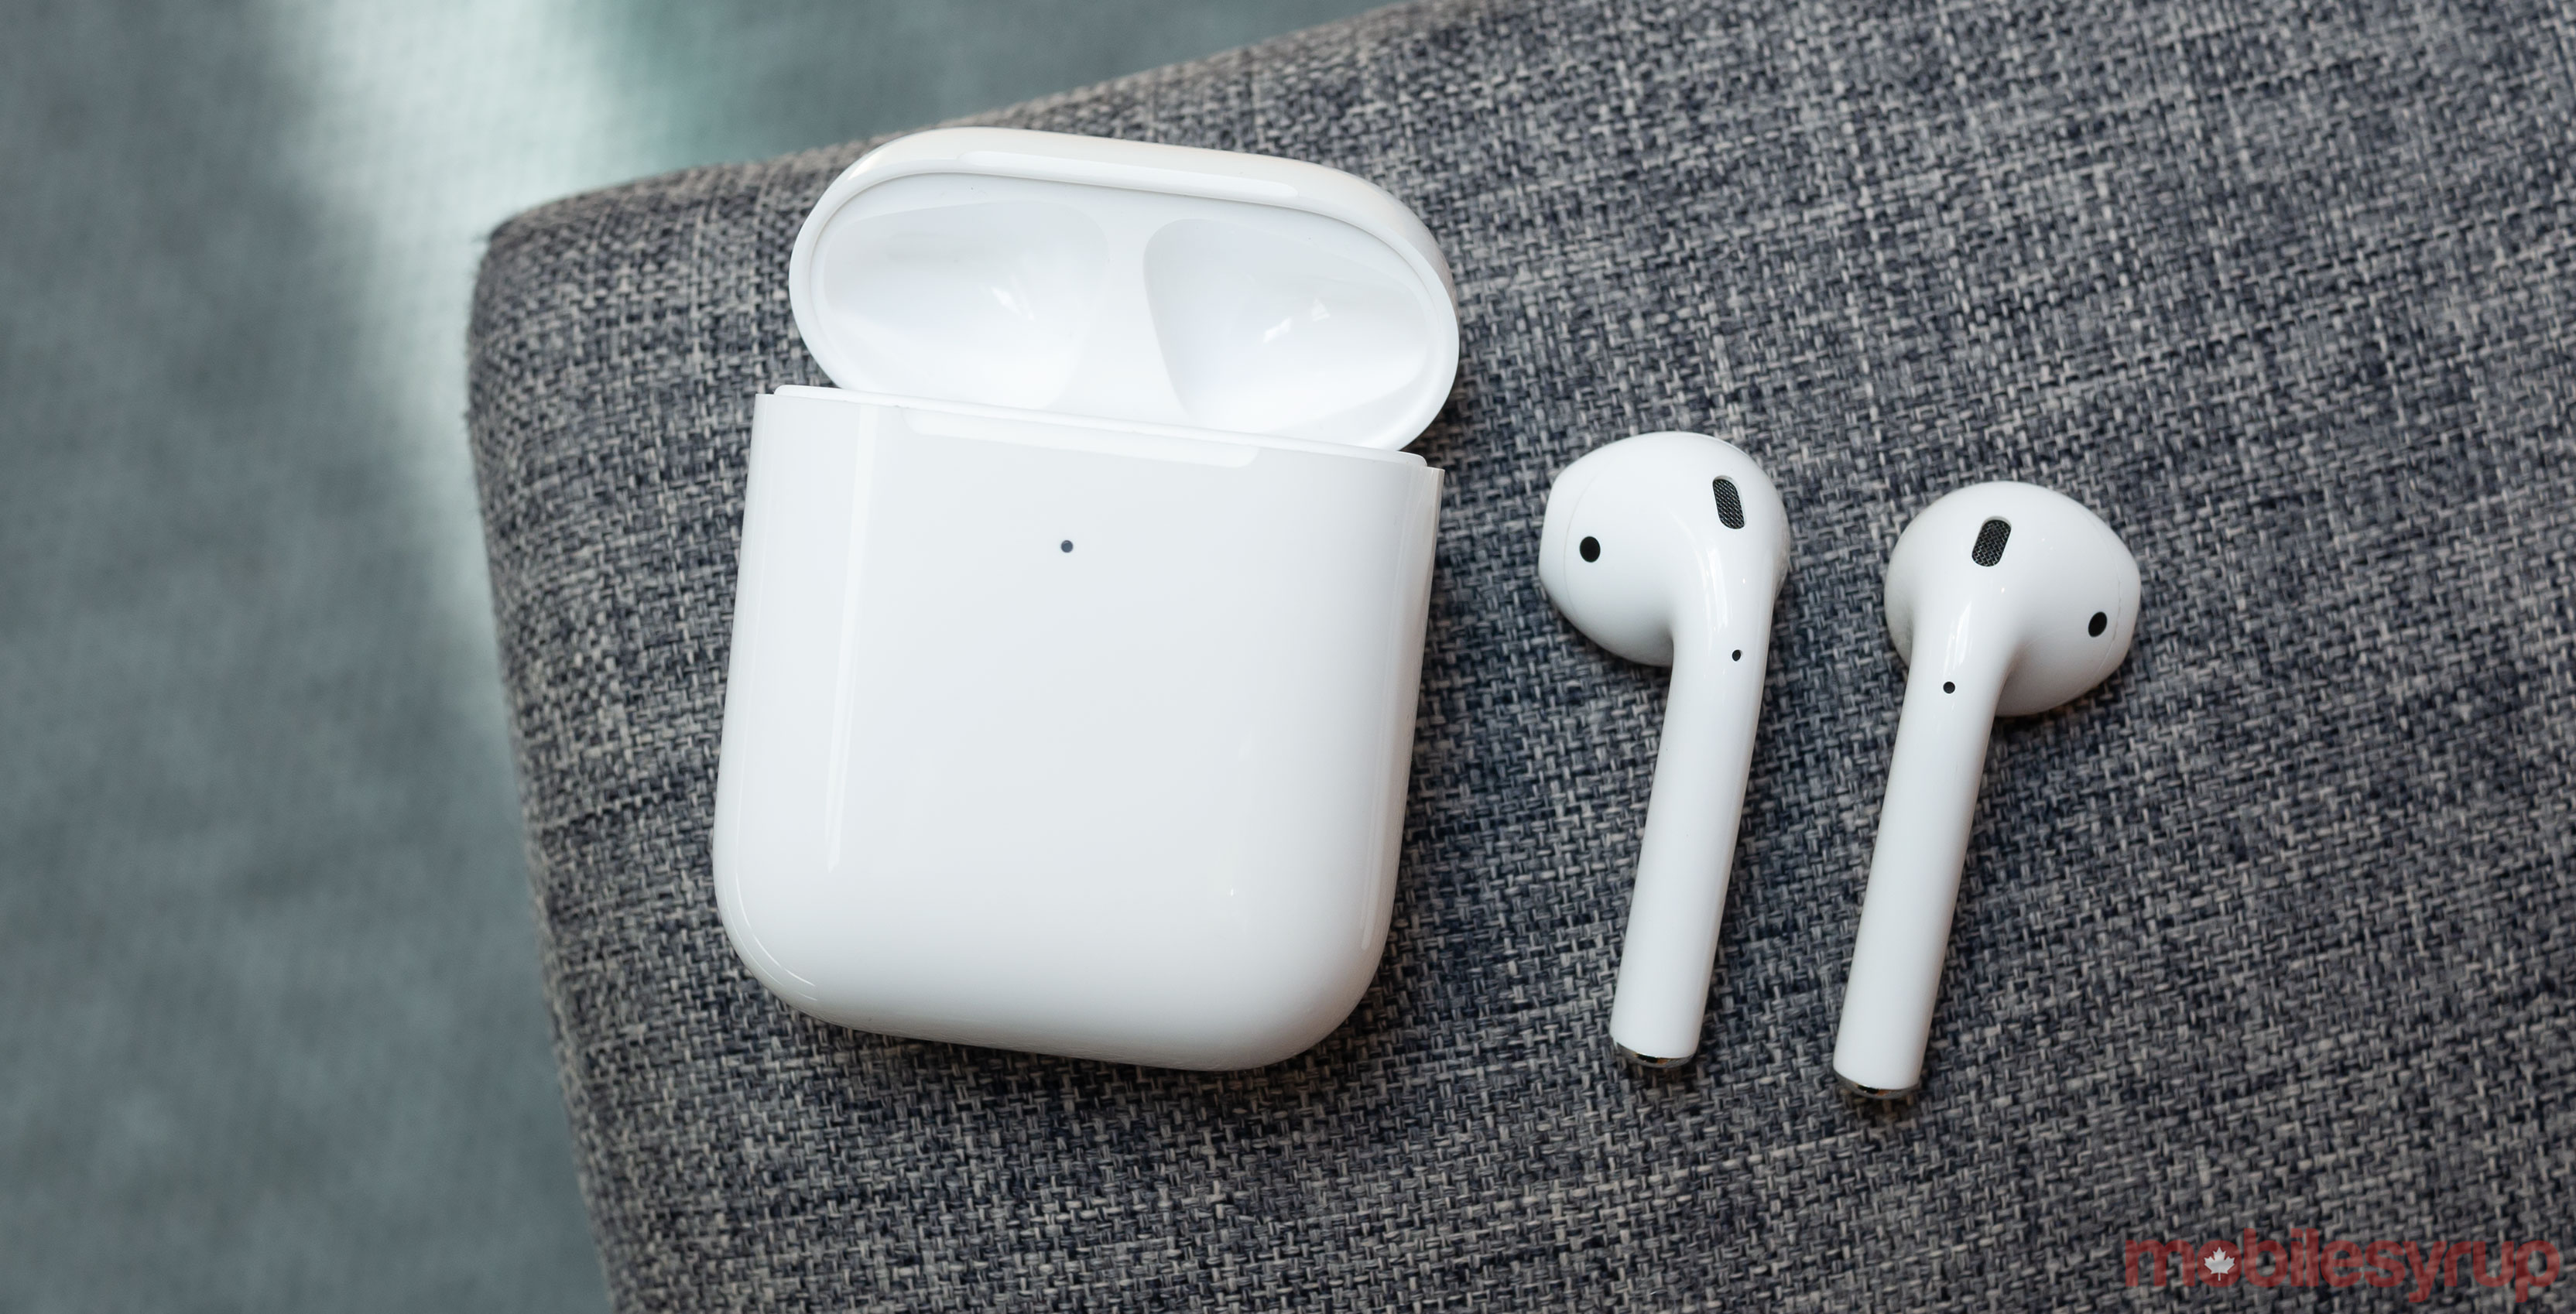 interferencia Broma alondra Apple AirPods (2019) Review: You've heard these before